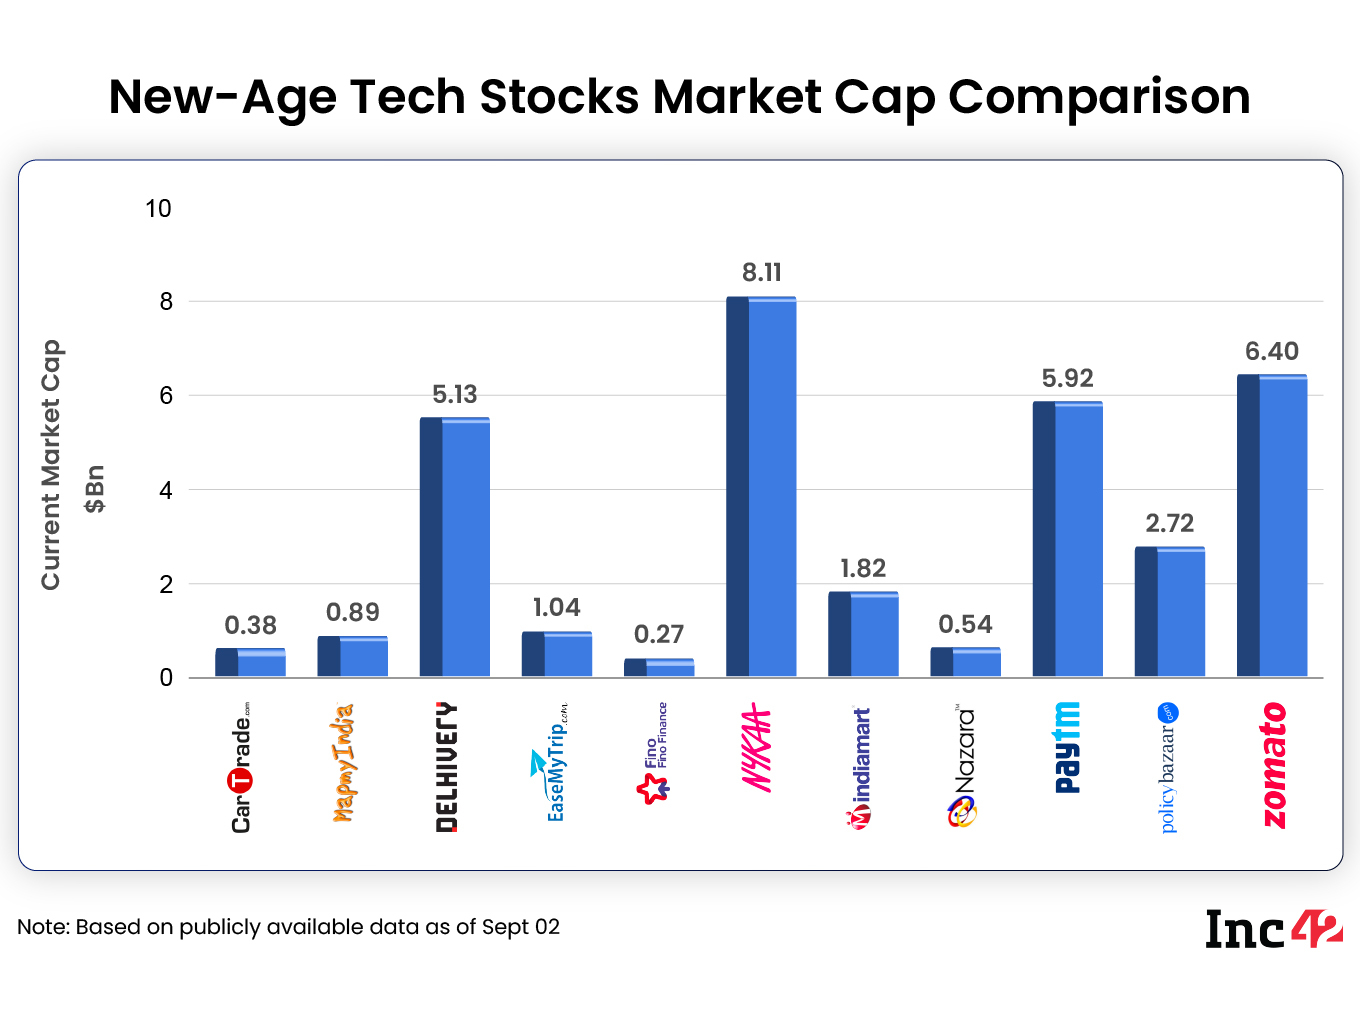 The 11 new-age tech stocks ended the week with a combined market cap of around $33.2 Bn versus $33.6 Bn last week